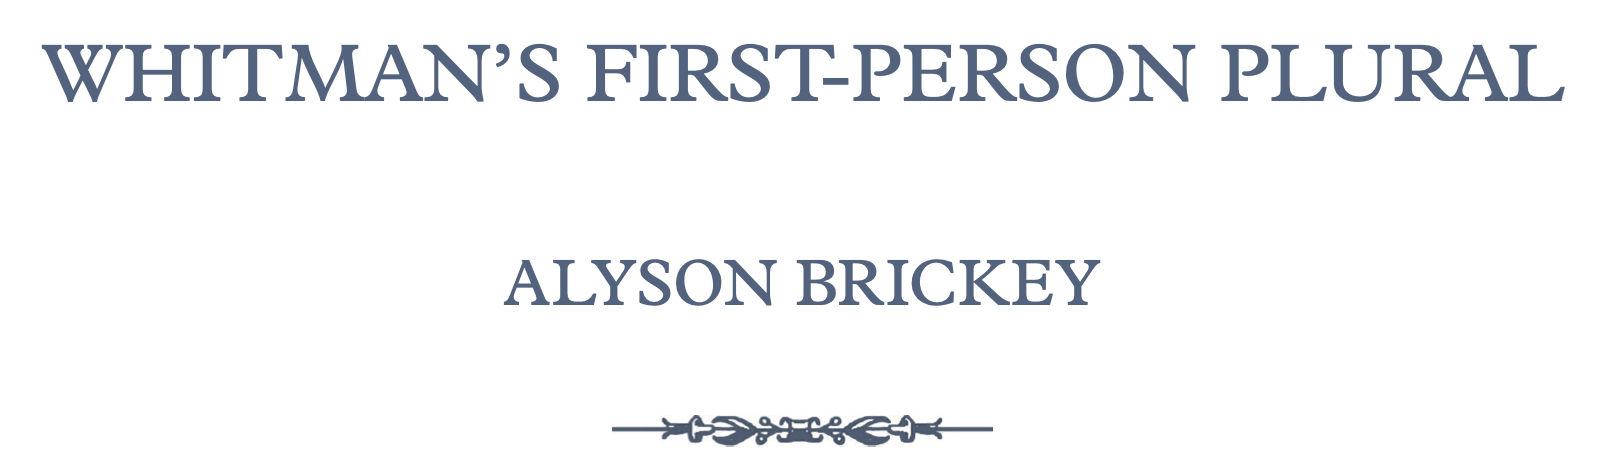 Image with the words "Whitman's First-Person Plural: Alyson Brickey".